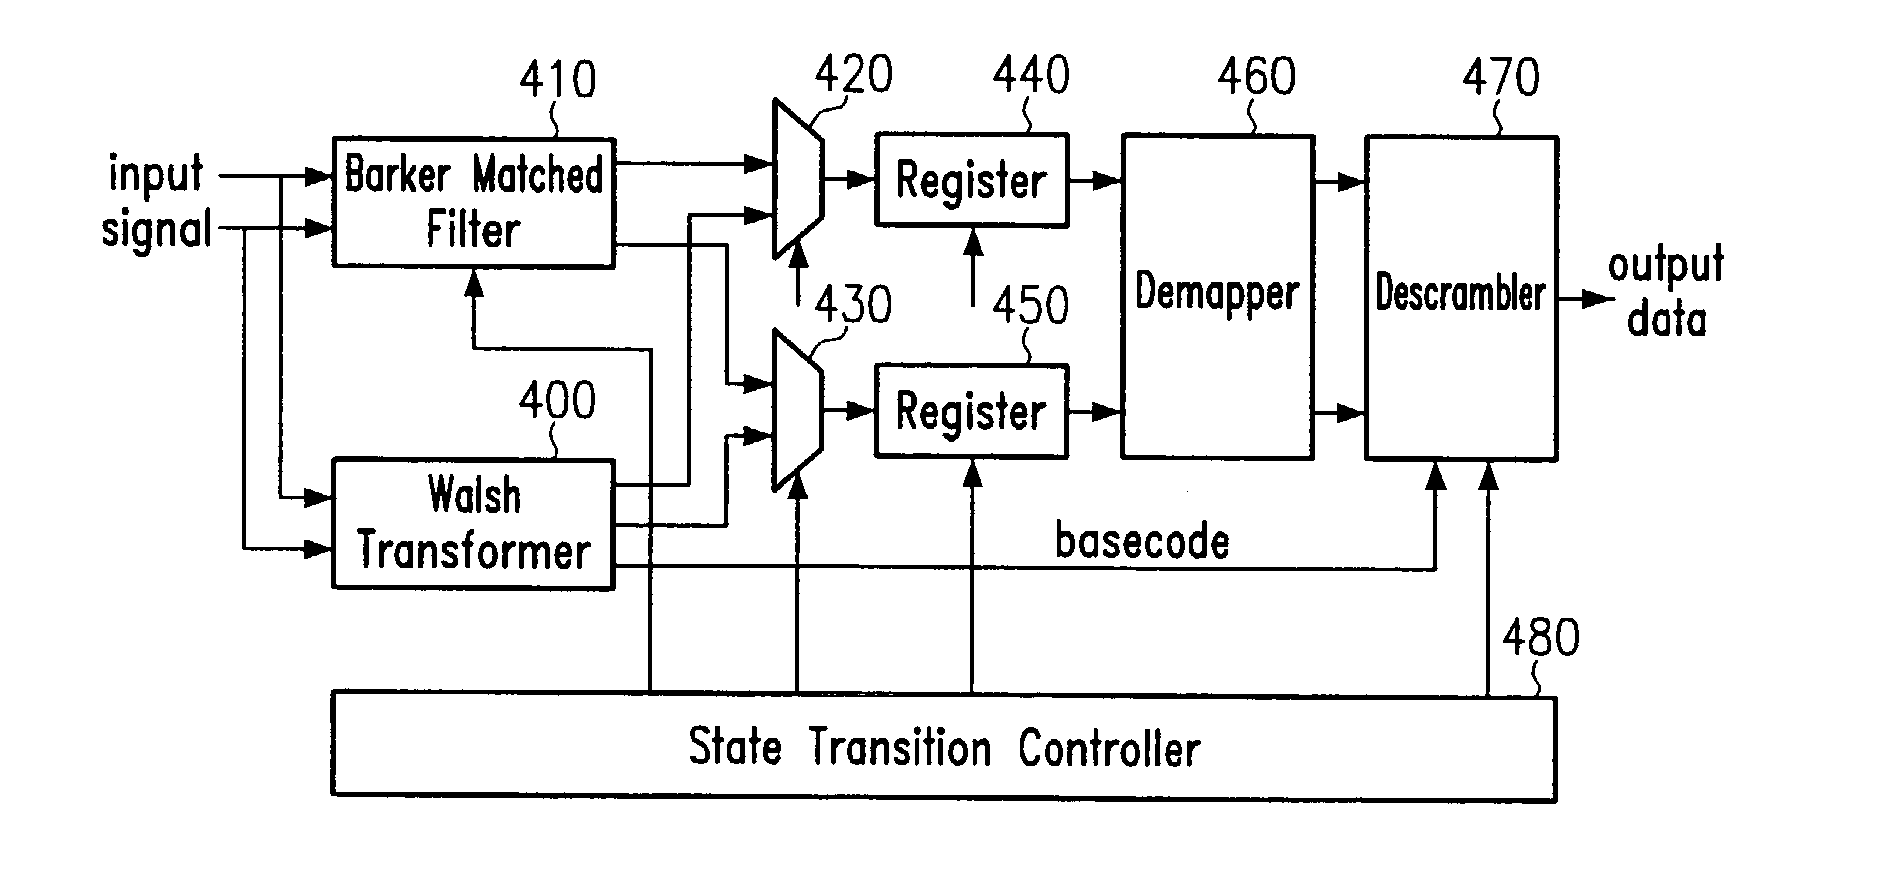 Complementary code decoding by reduced sized circuits